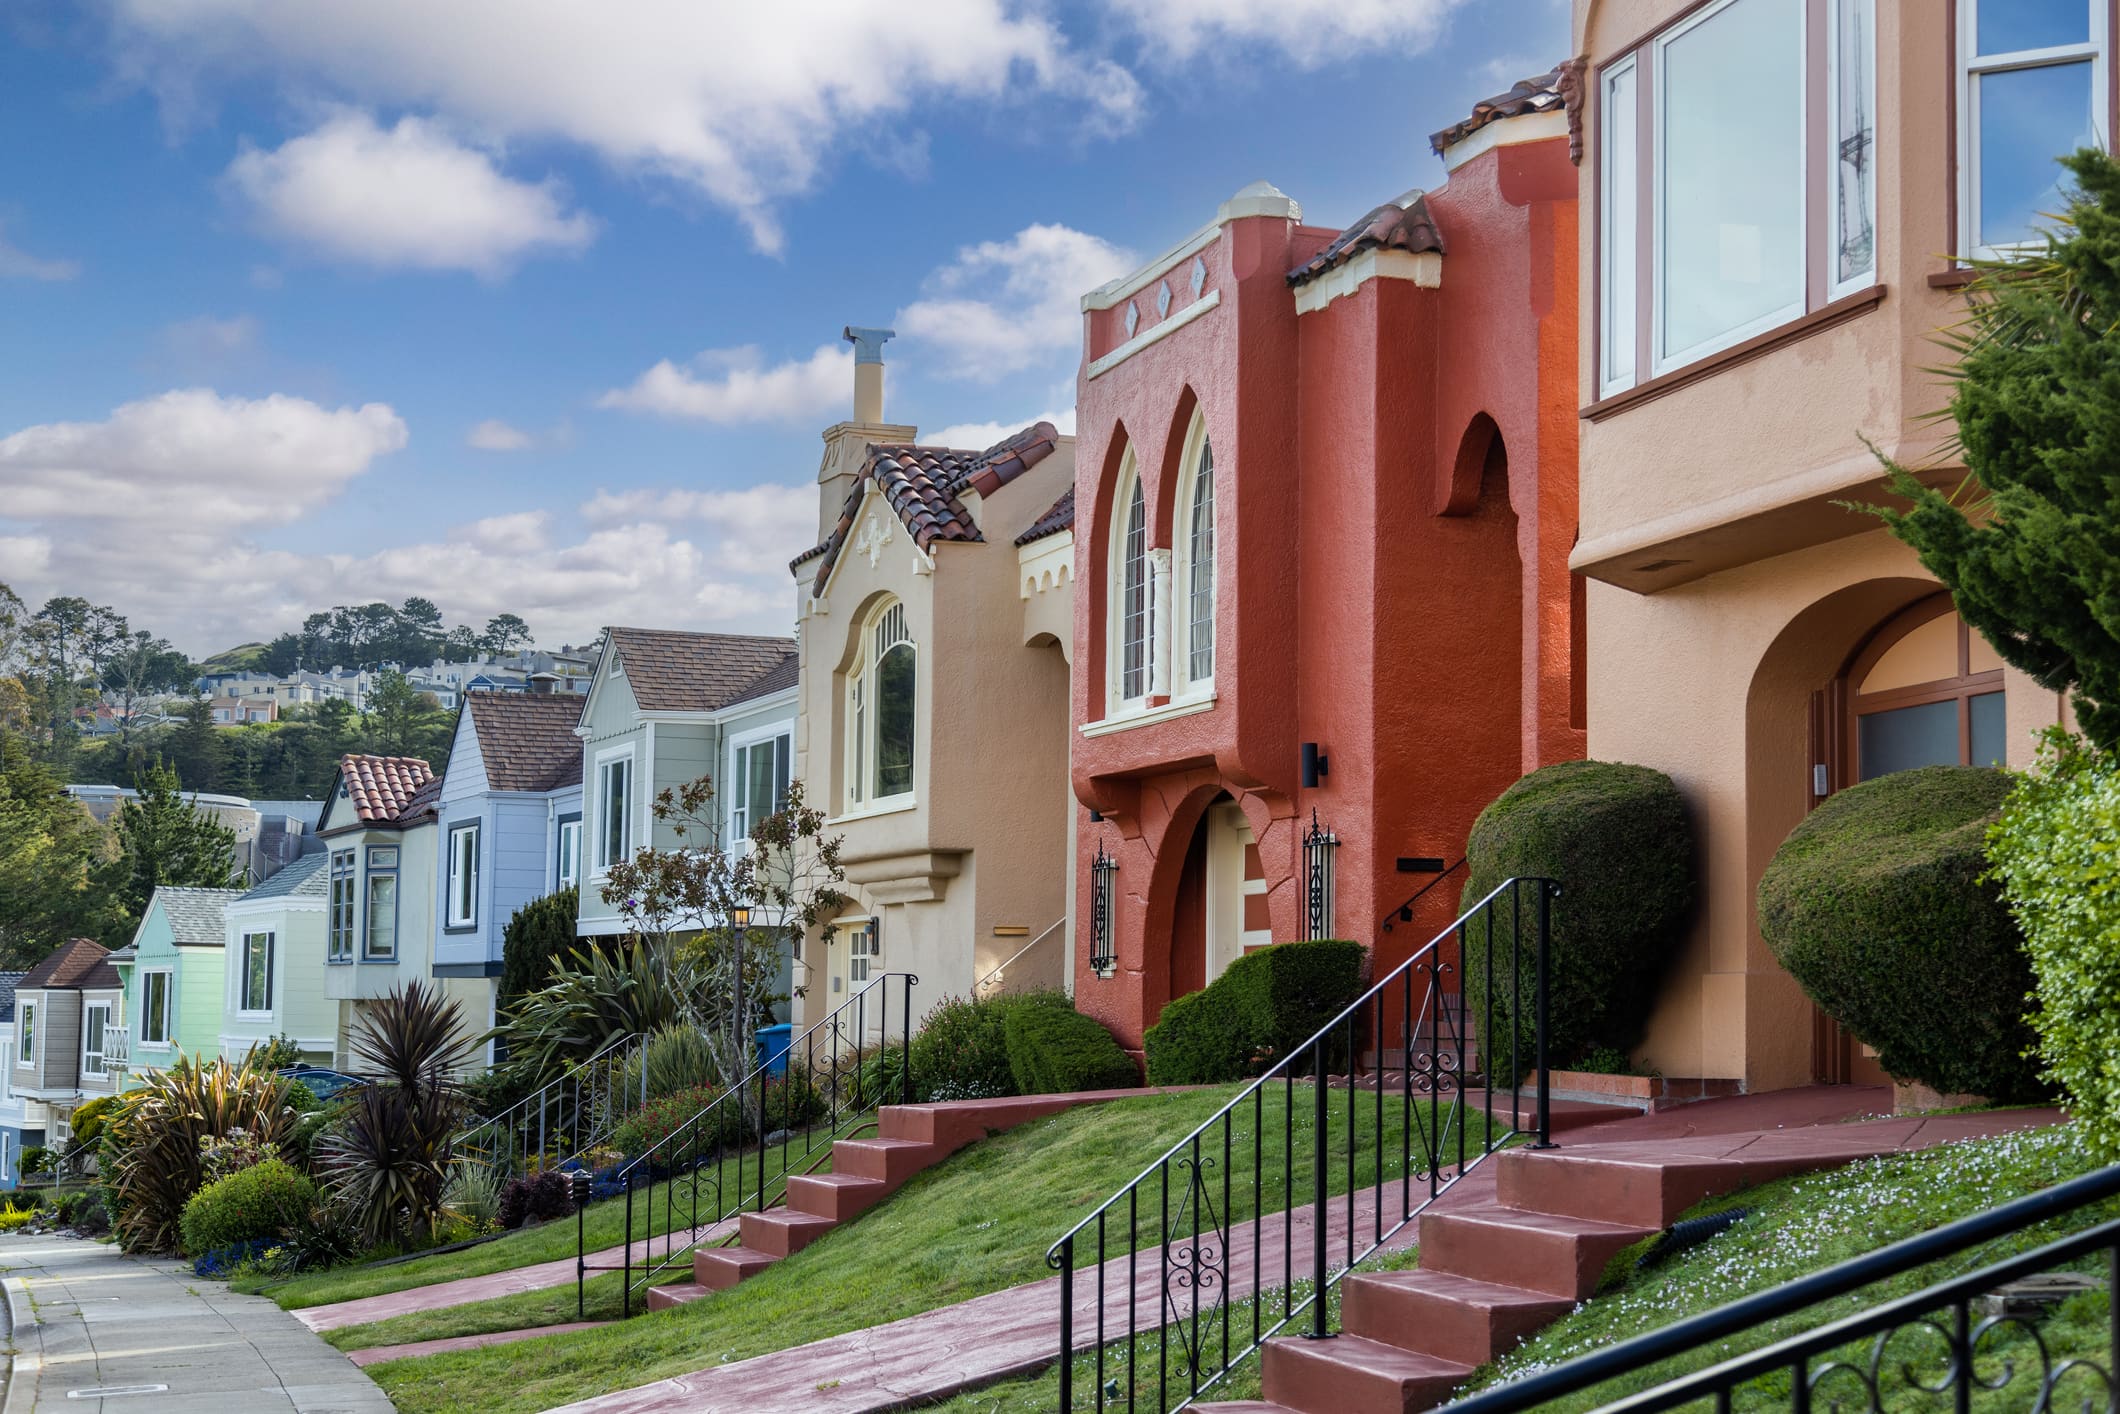 Americans who don't own a home say they lack savings for a down payment, CNBC survey finds